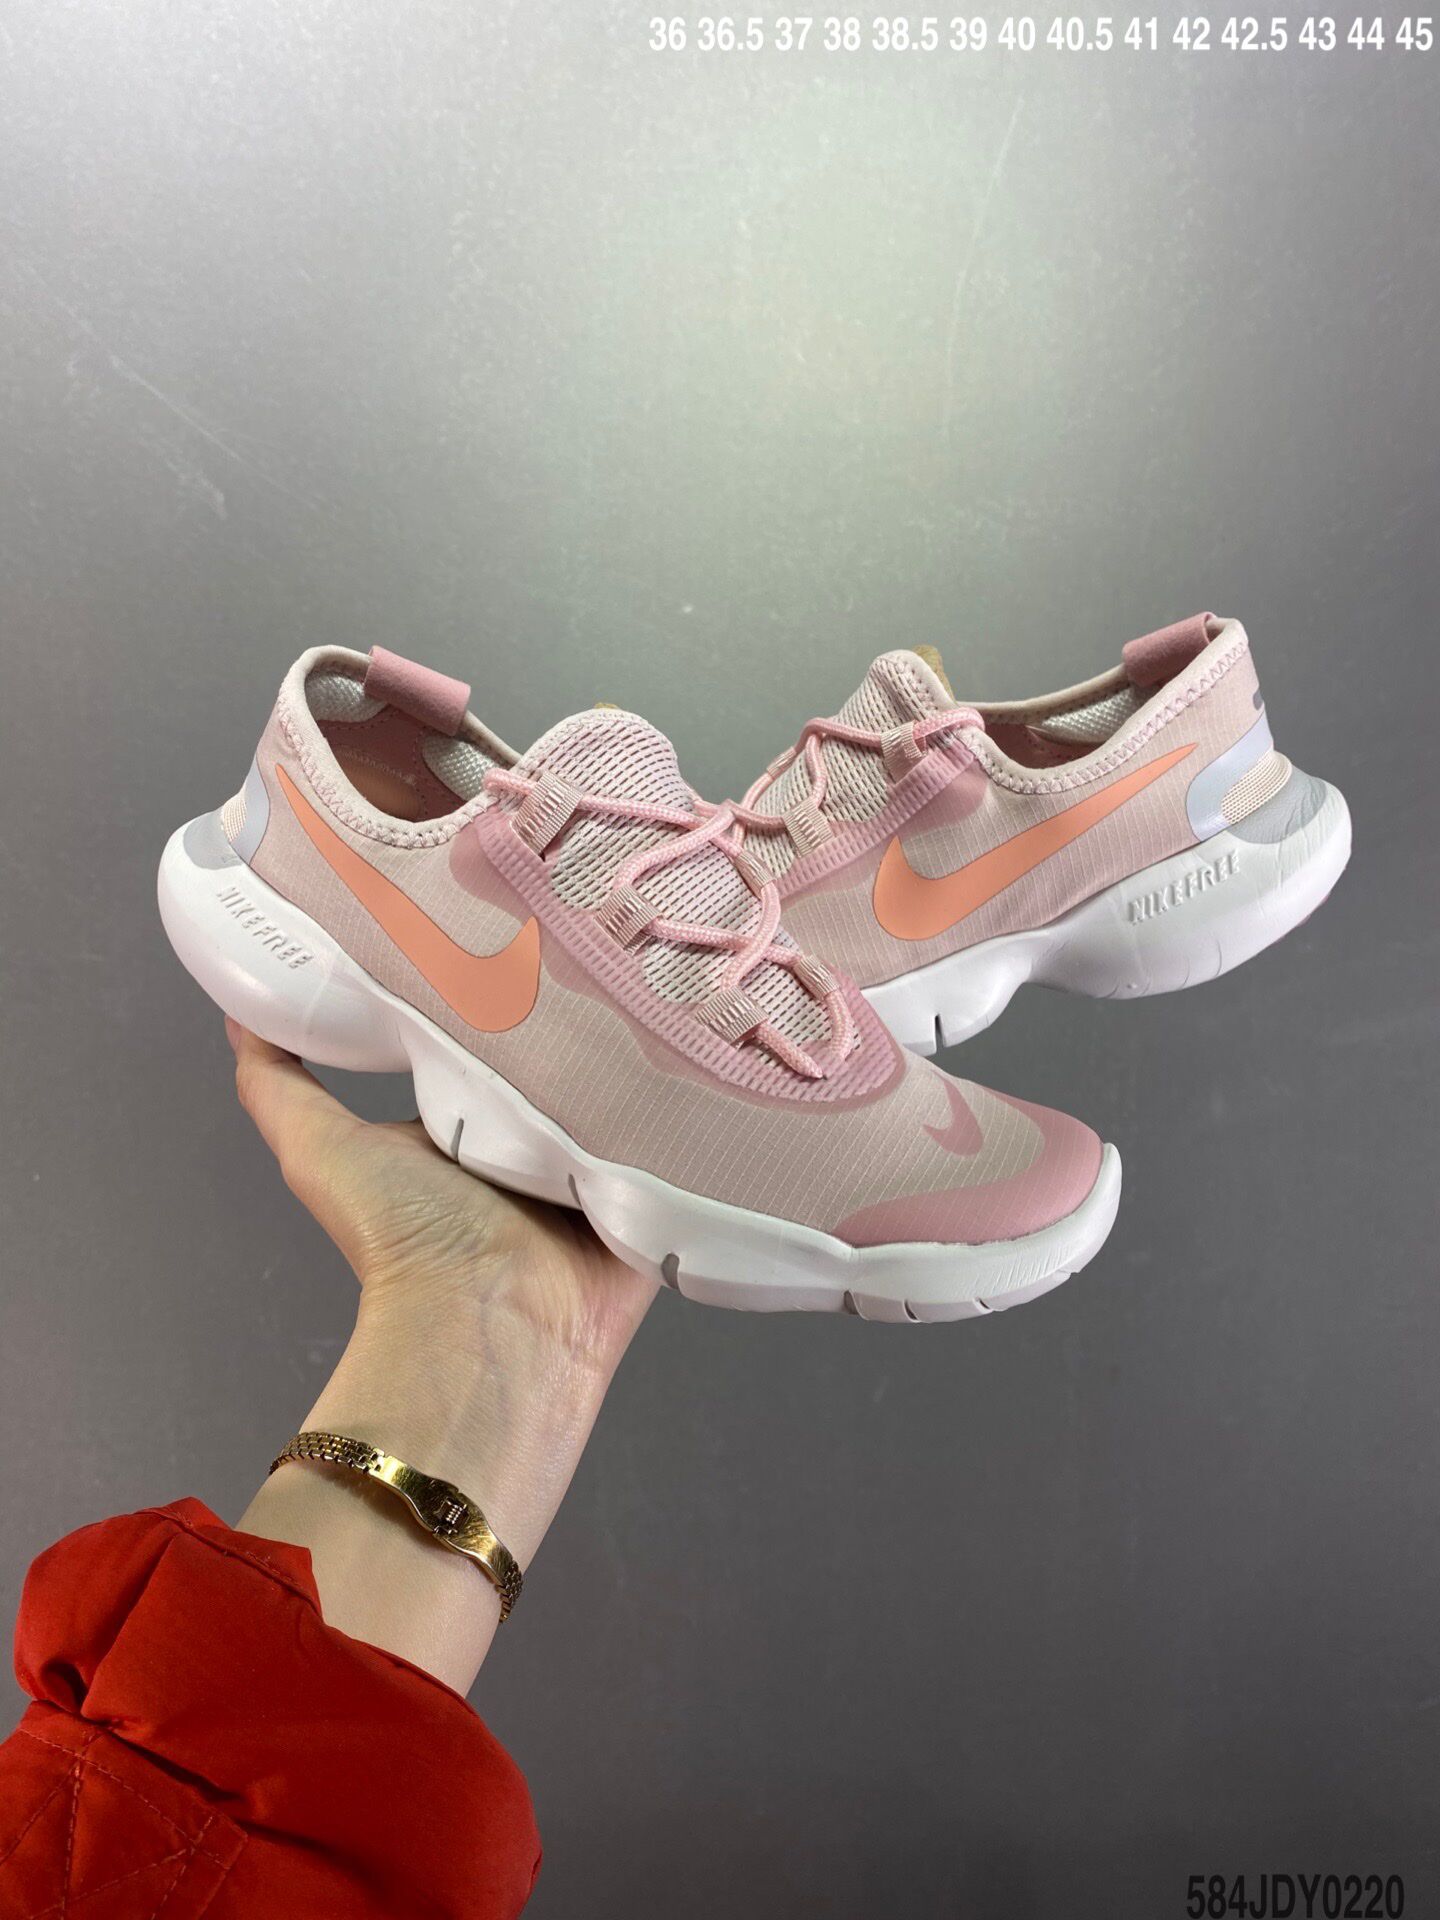 New Women Nike Free 2.0 Flyknit Pink White Shoes - Click Image to Close